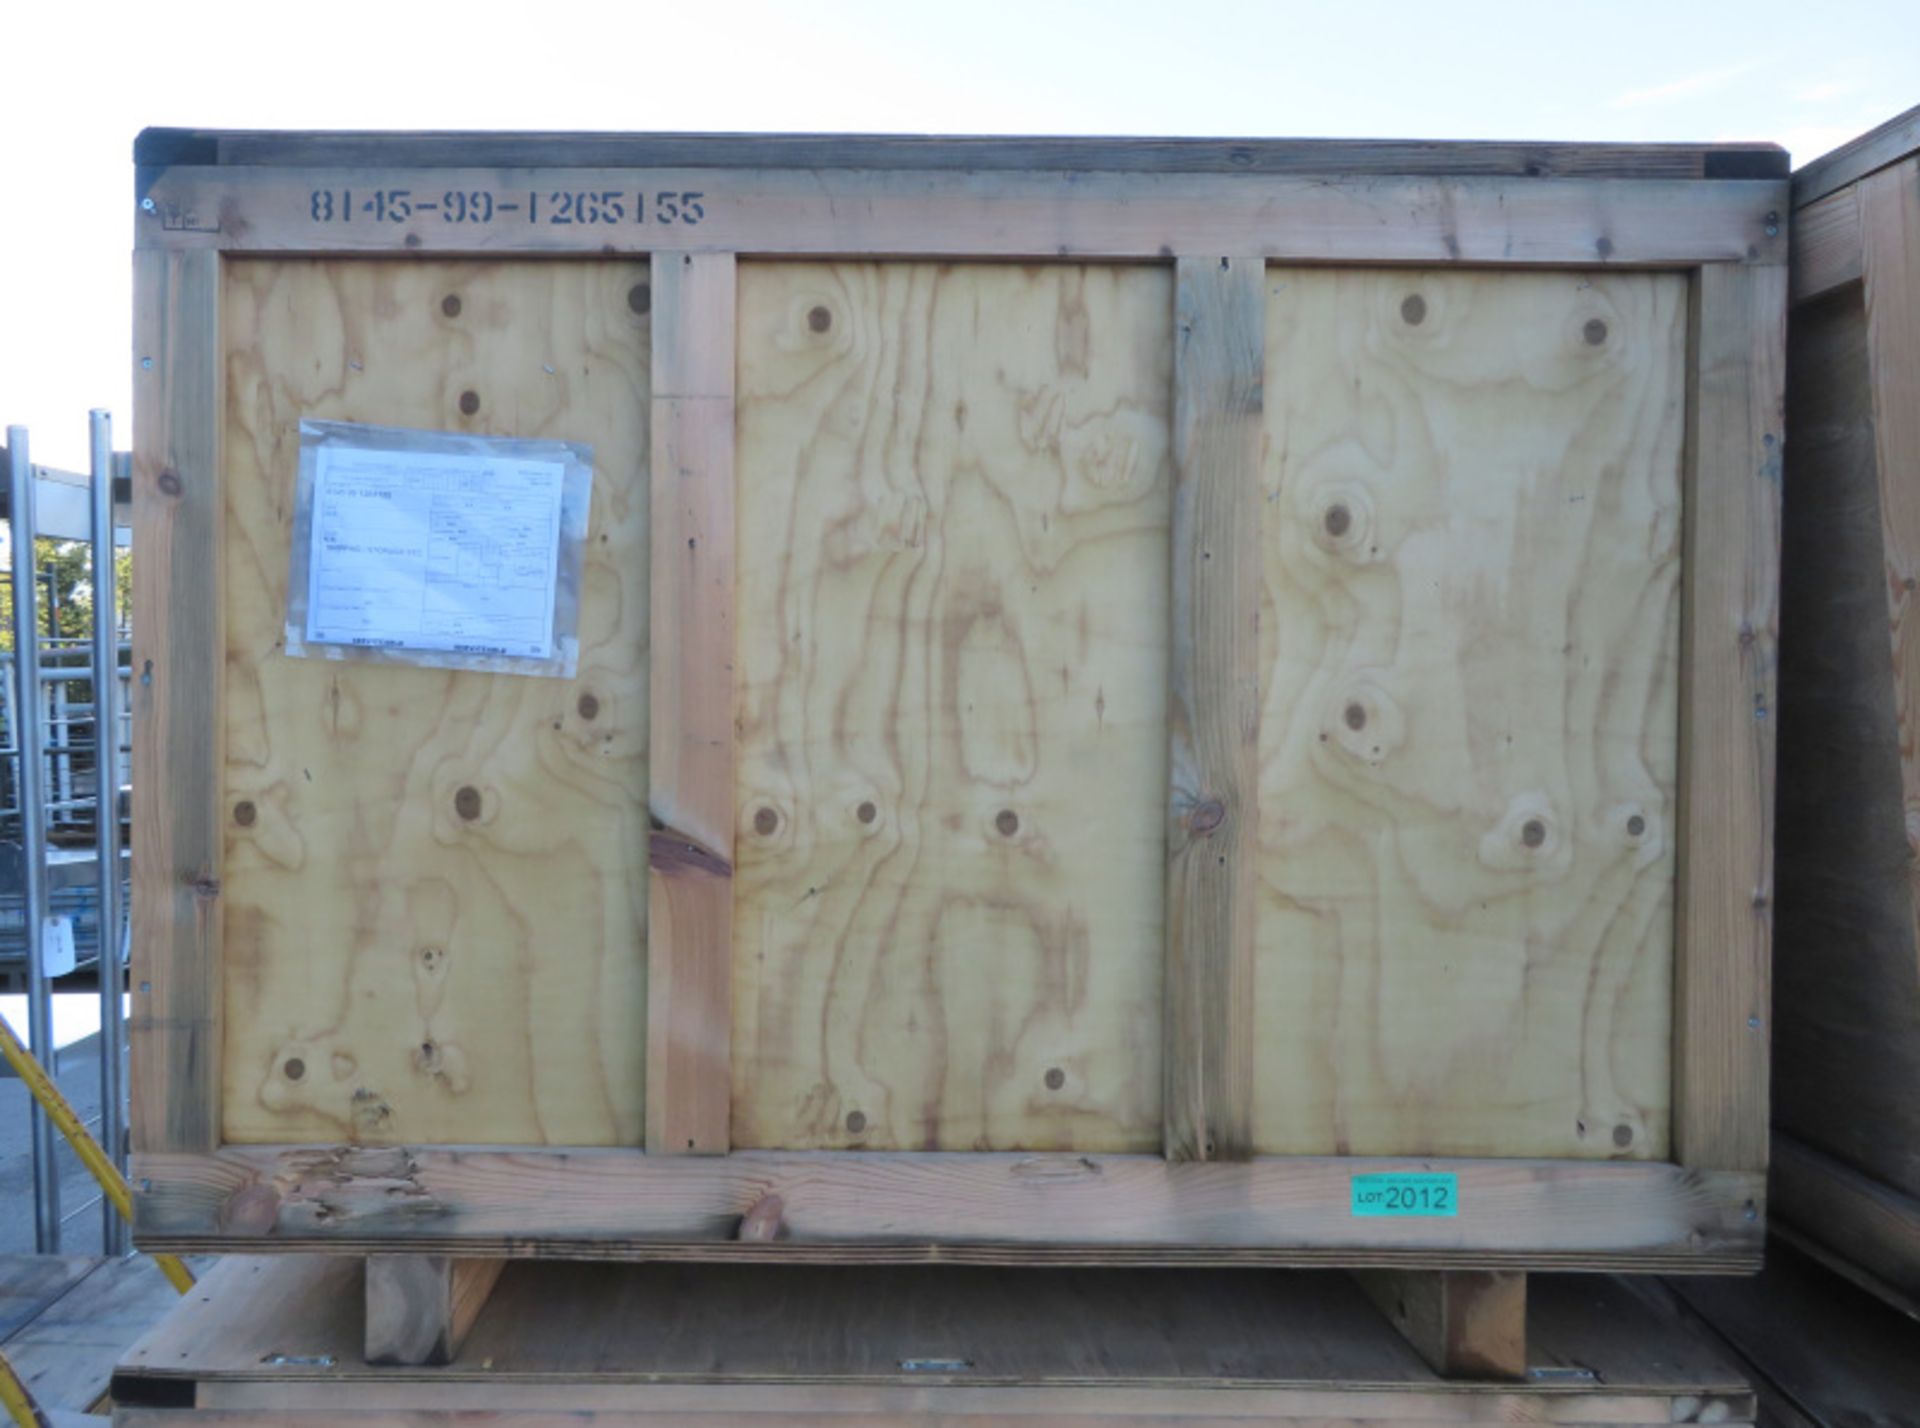 Wooden Shipping Crate L 1400mm x D 1100mnm x H 1050mm